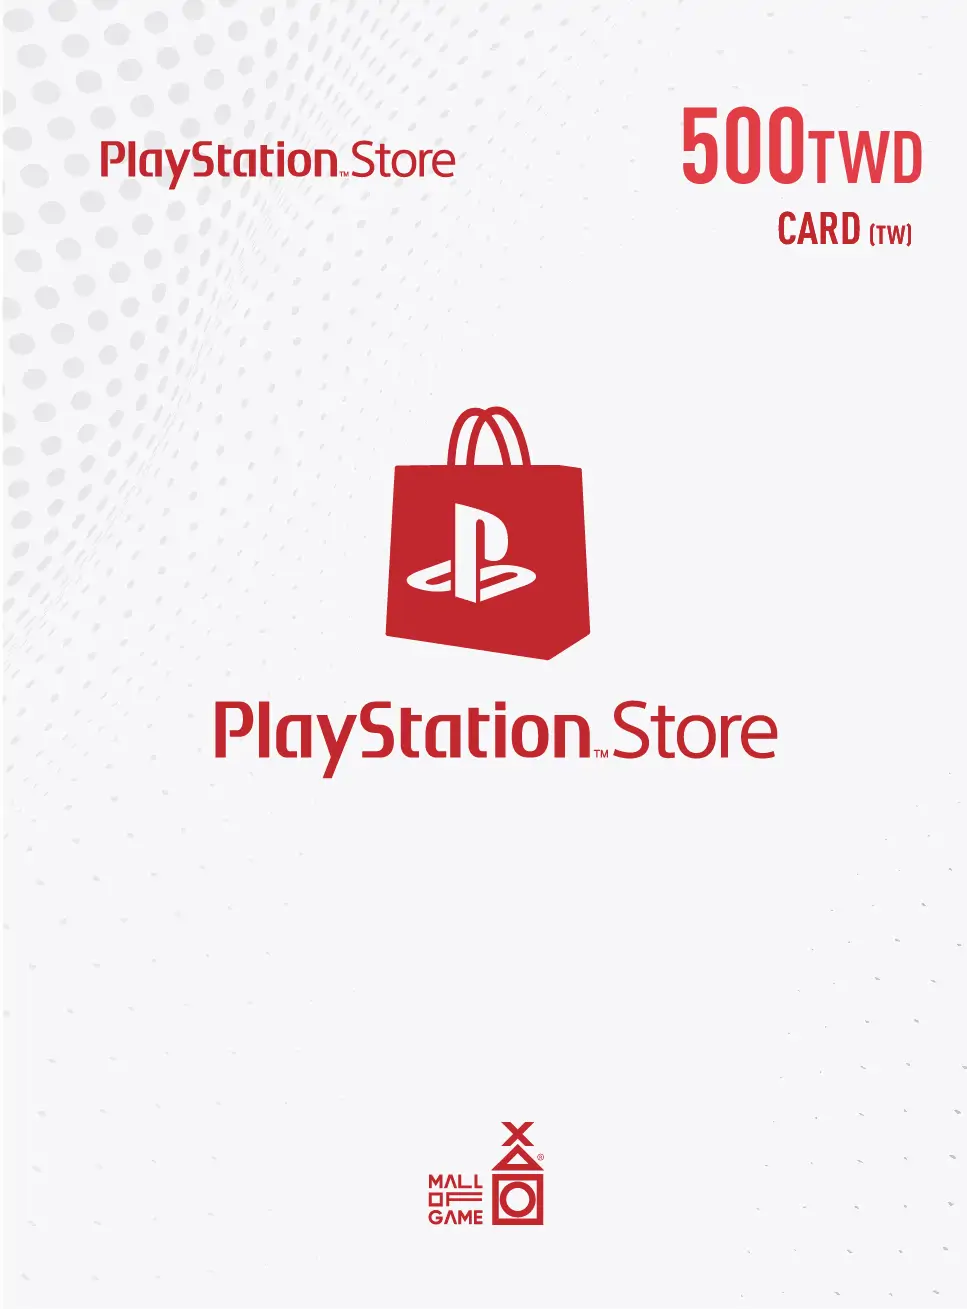 PlayStation™Store TWD500 Gift Cards (TW)